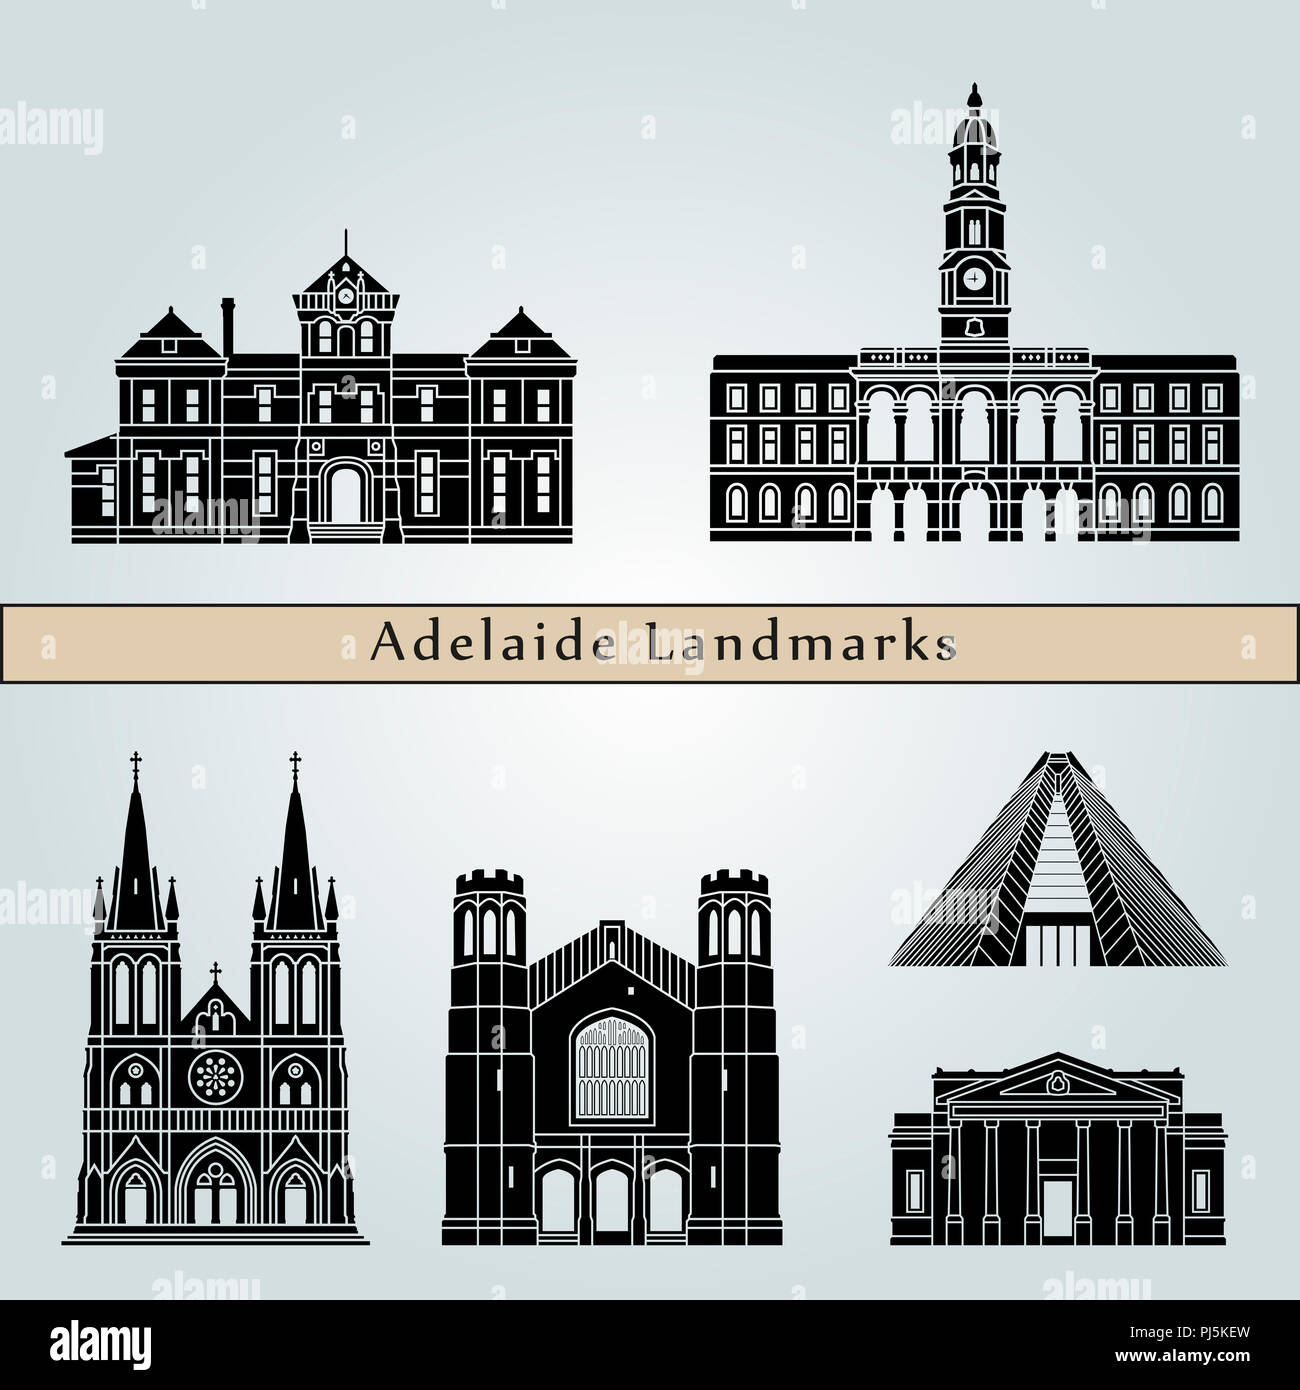 Adelaide V2 landmarks and monuments isolated on blue background in editable vector file Stock Photo